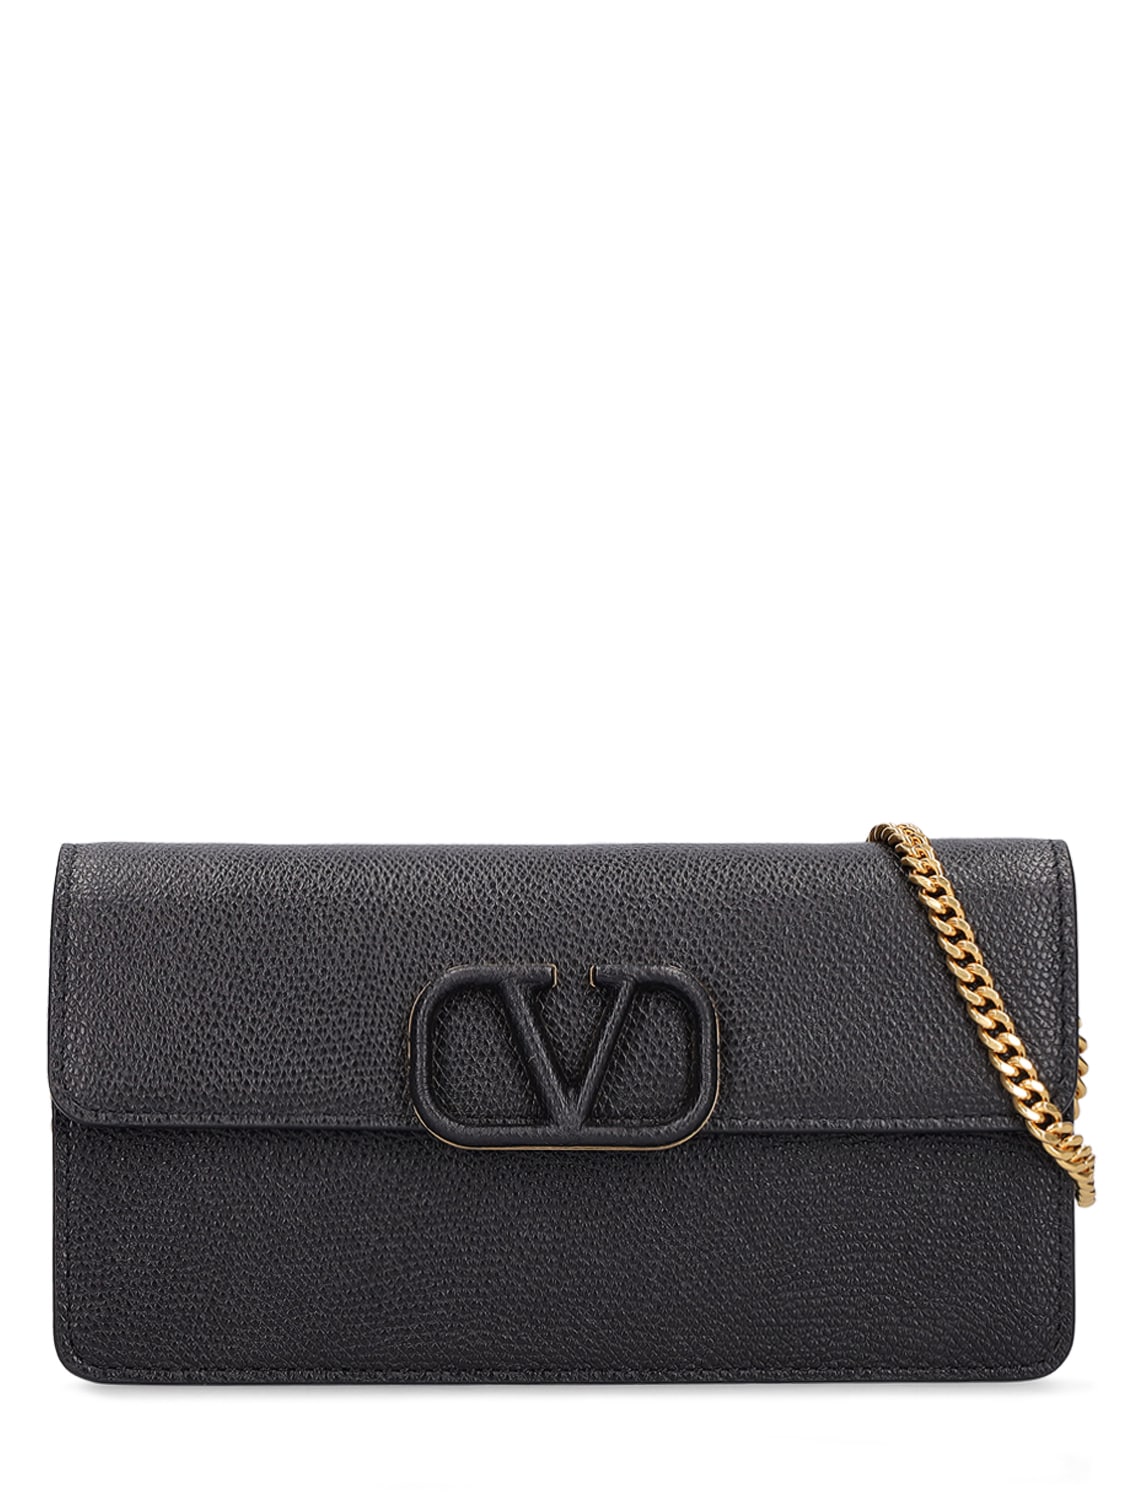 Image of Vlogo Leather Wallet W/chain